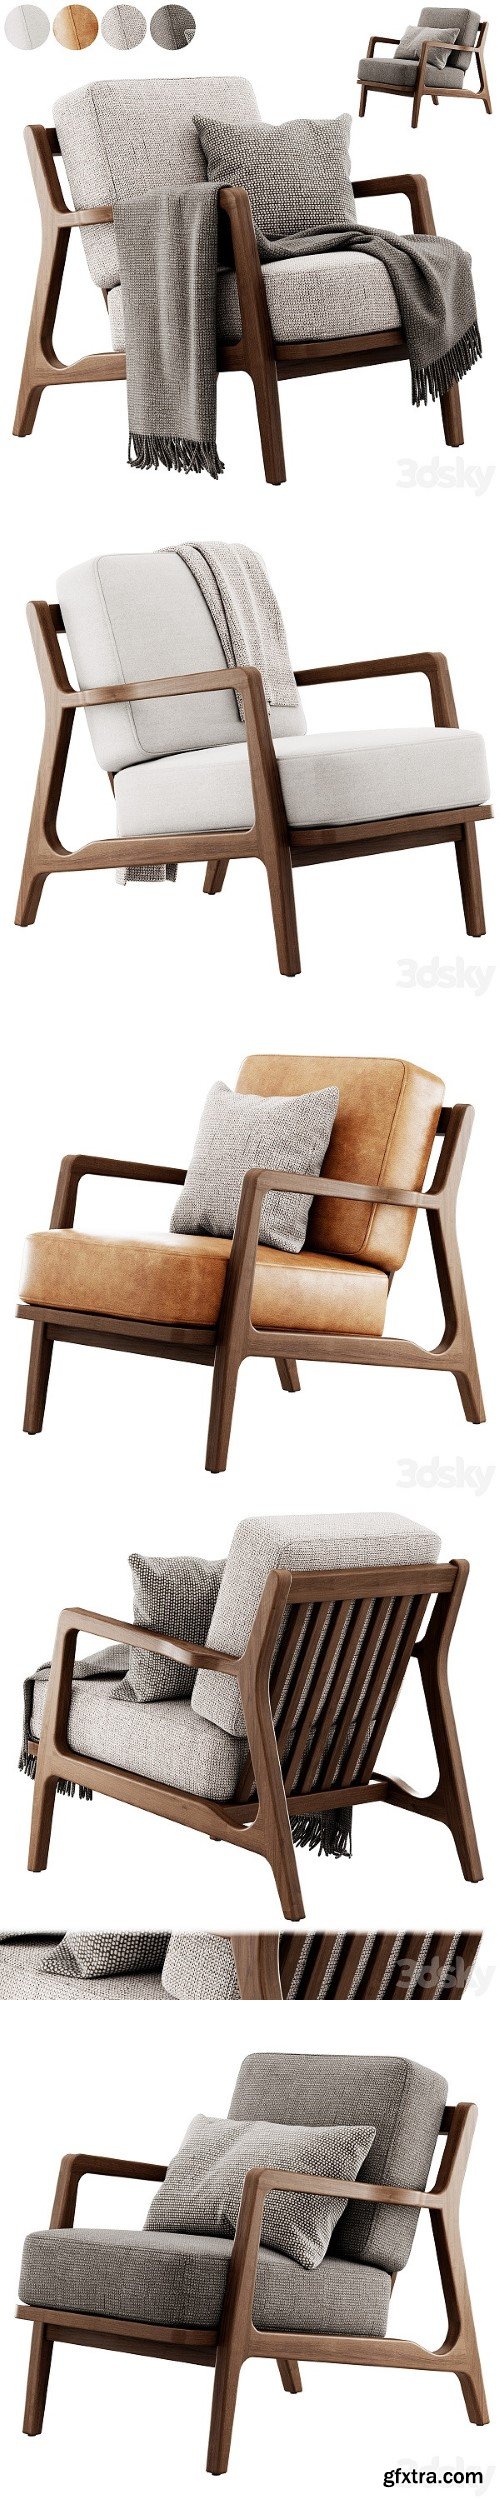 Pro 3DSky - Verity Lounge Chair by Poly and Bark